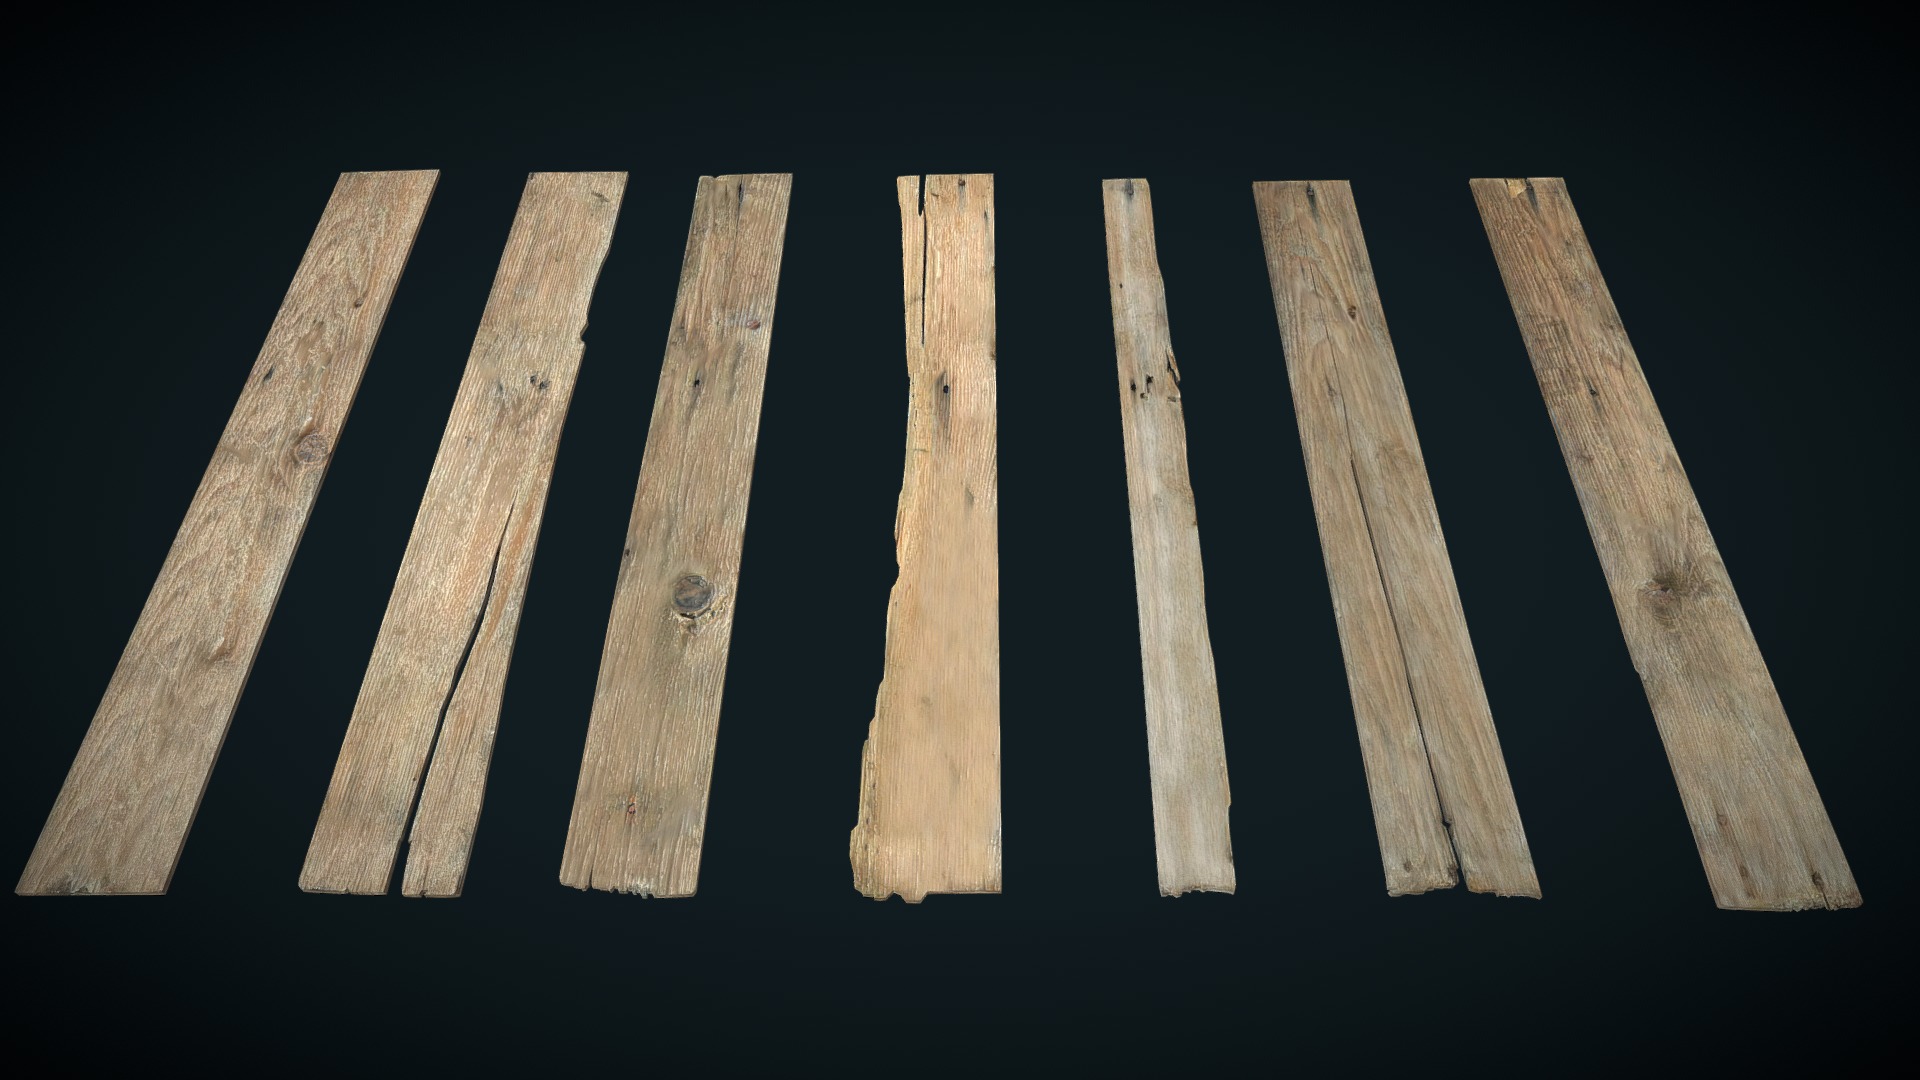 3D model Wooden Planks – Ready to Unity HDRP - This is a 3D model of the Wooden Planks - Ready to Unity HDRP. The 3D model is about a group of wooden sticks.